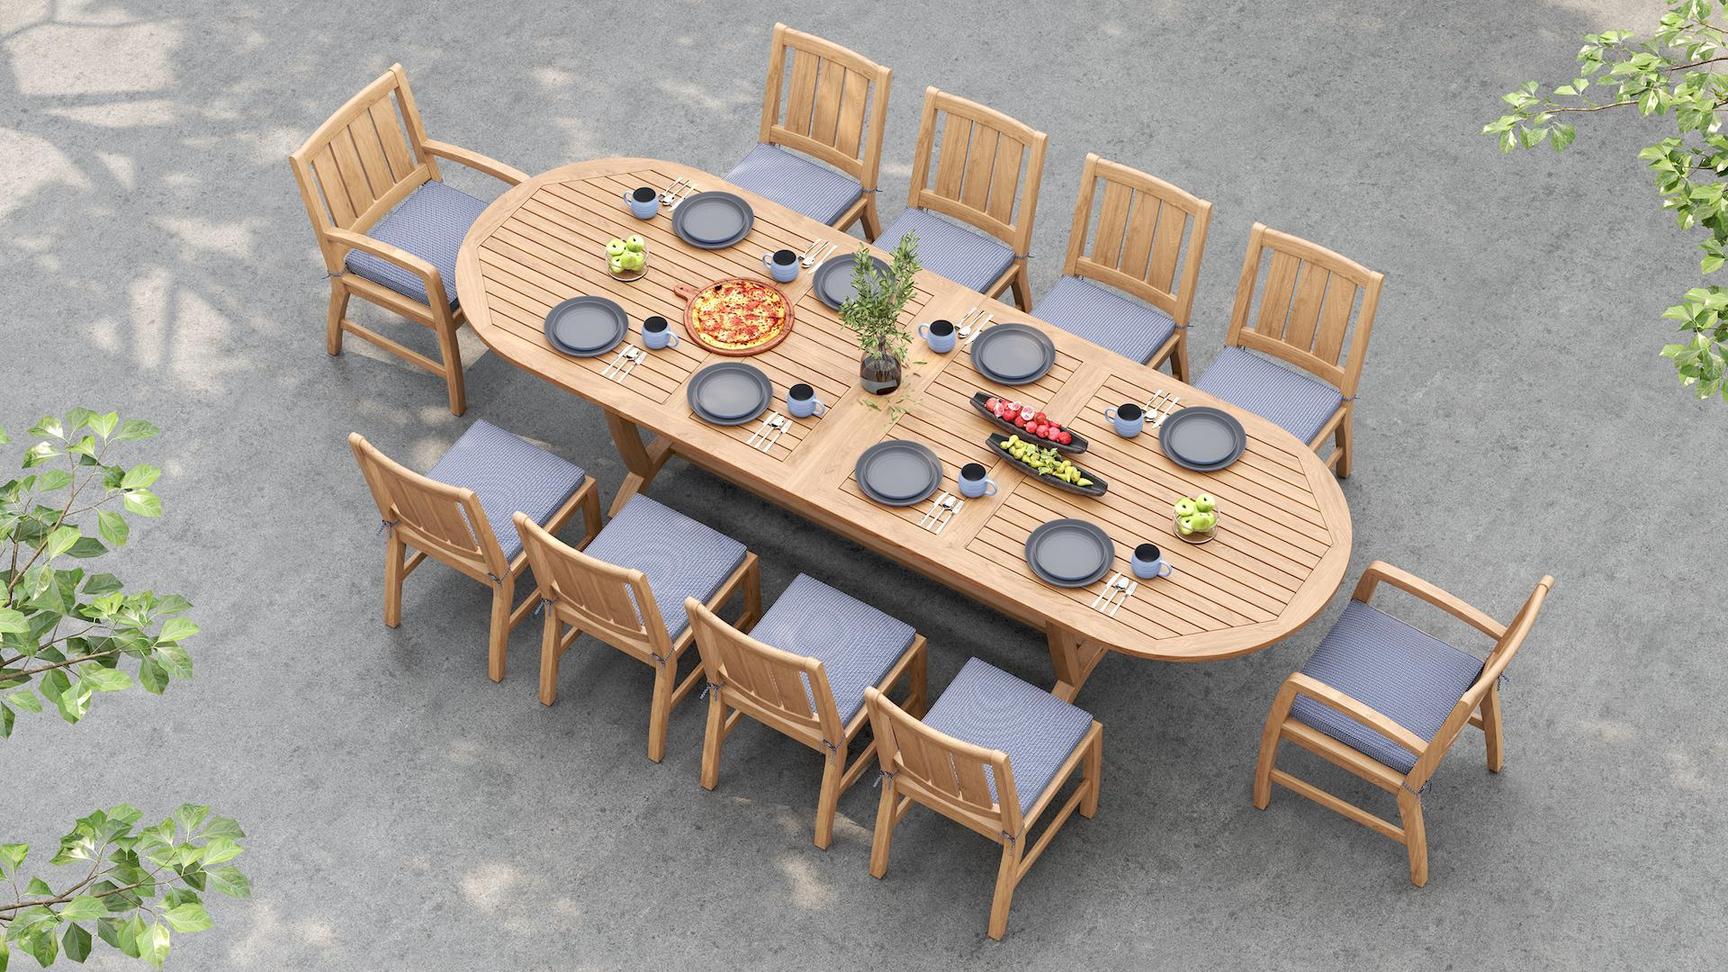 Small and Large Teak Tables for Social Gatherings